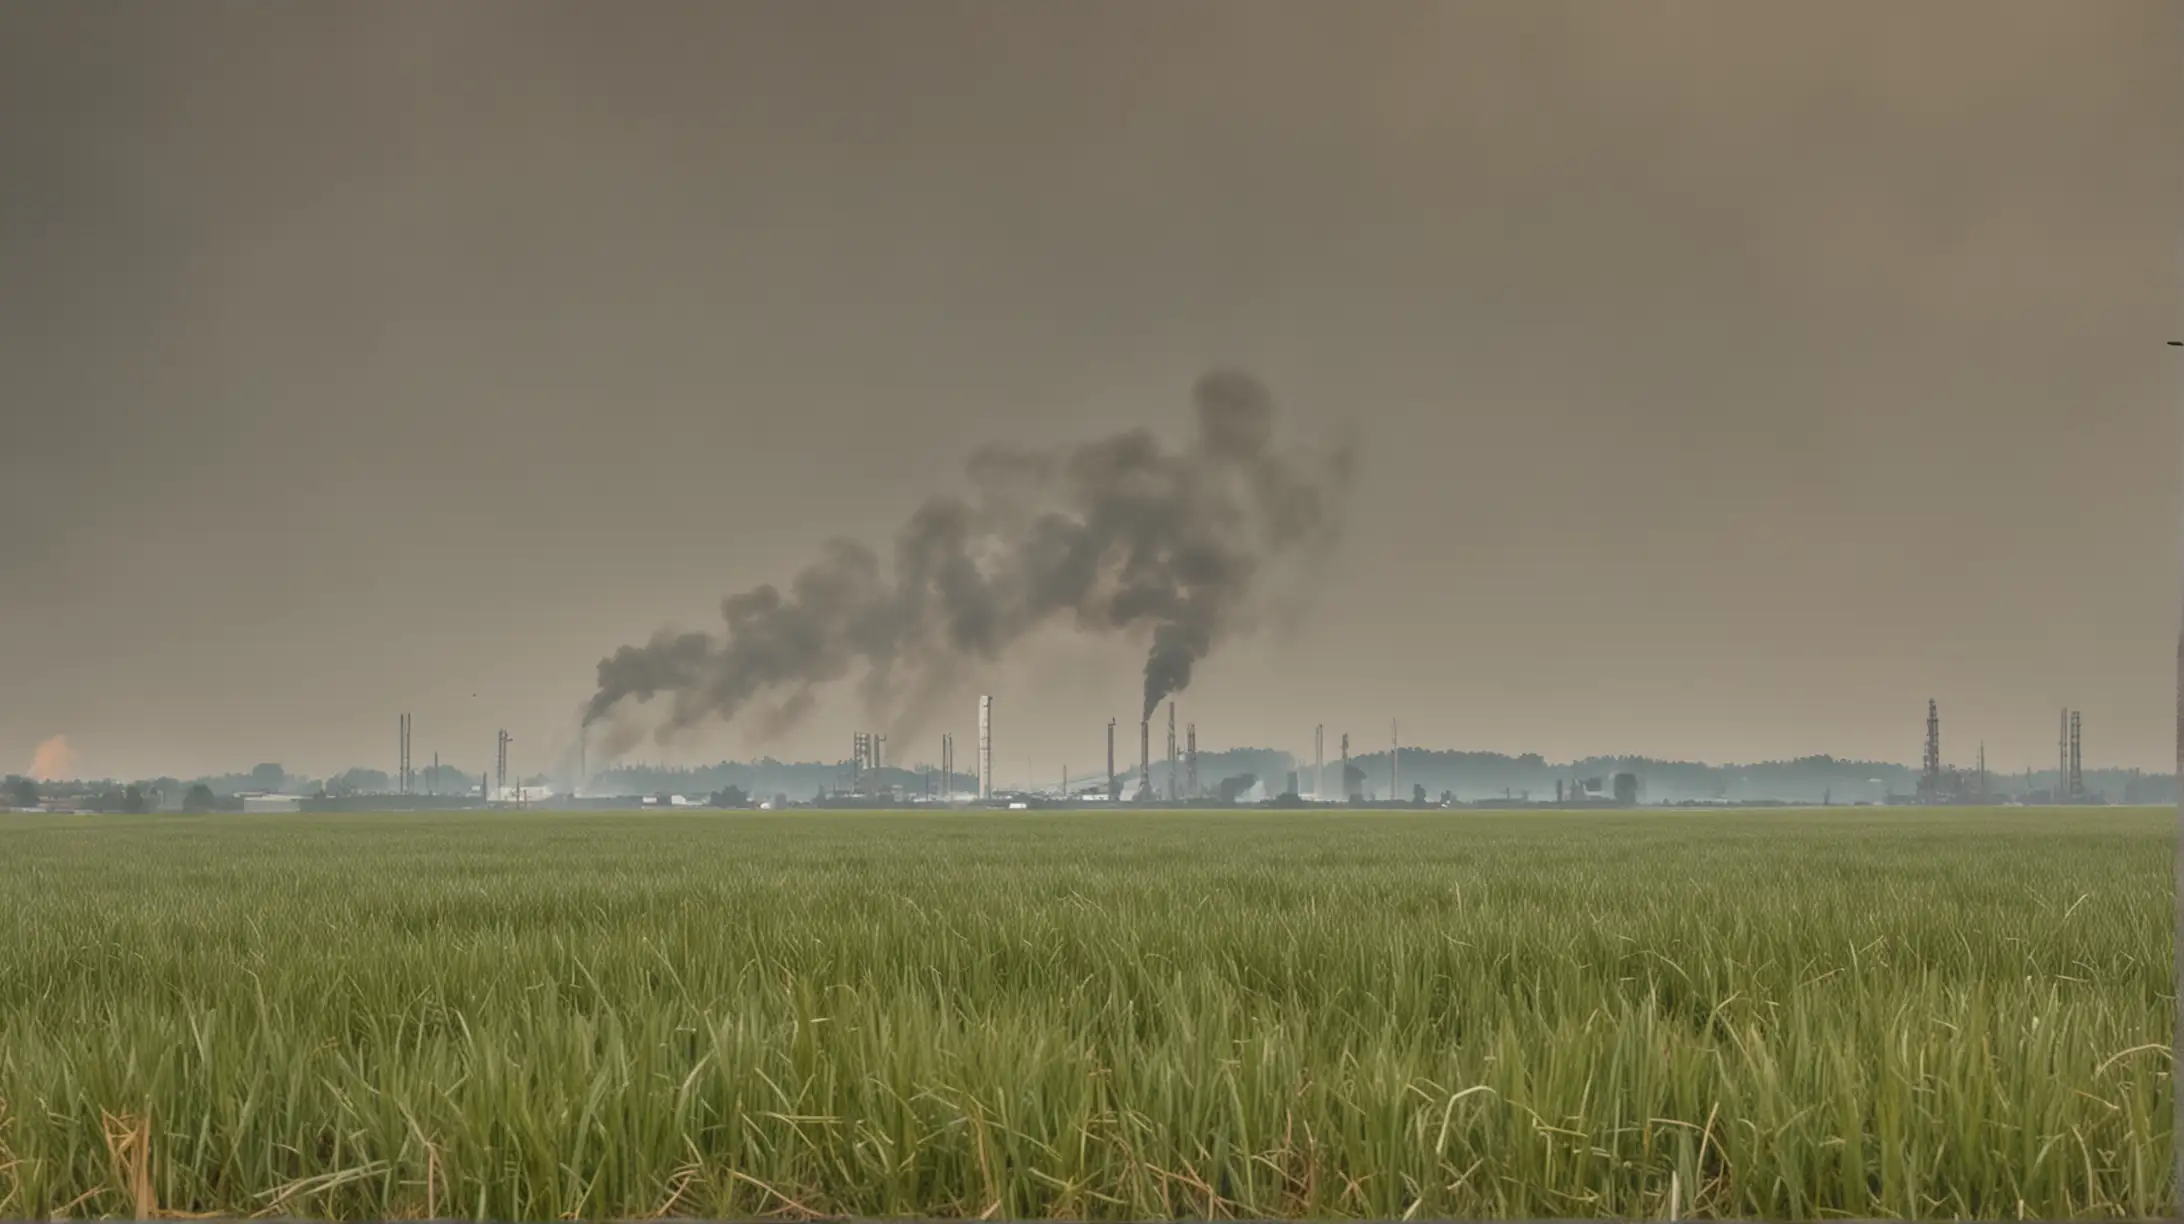 Expansive Grass Field with Distant Industrial Smoke